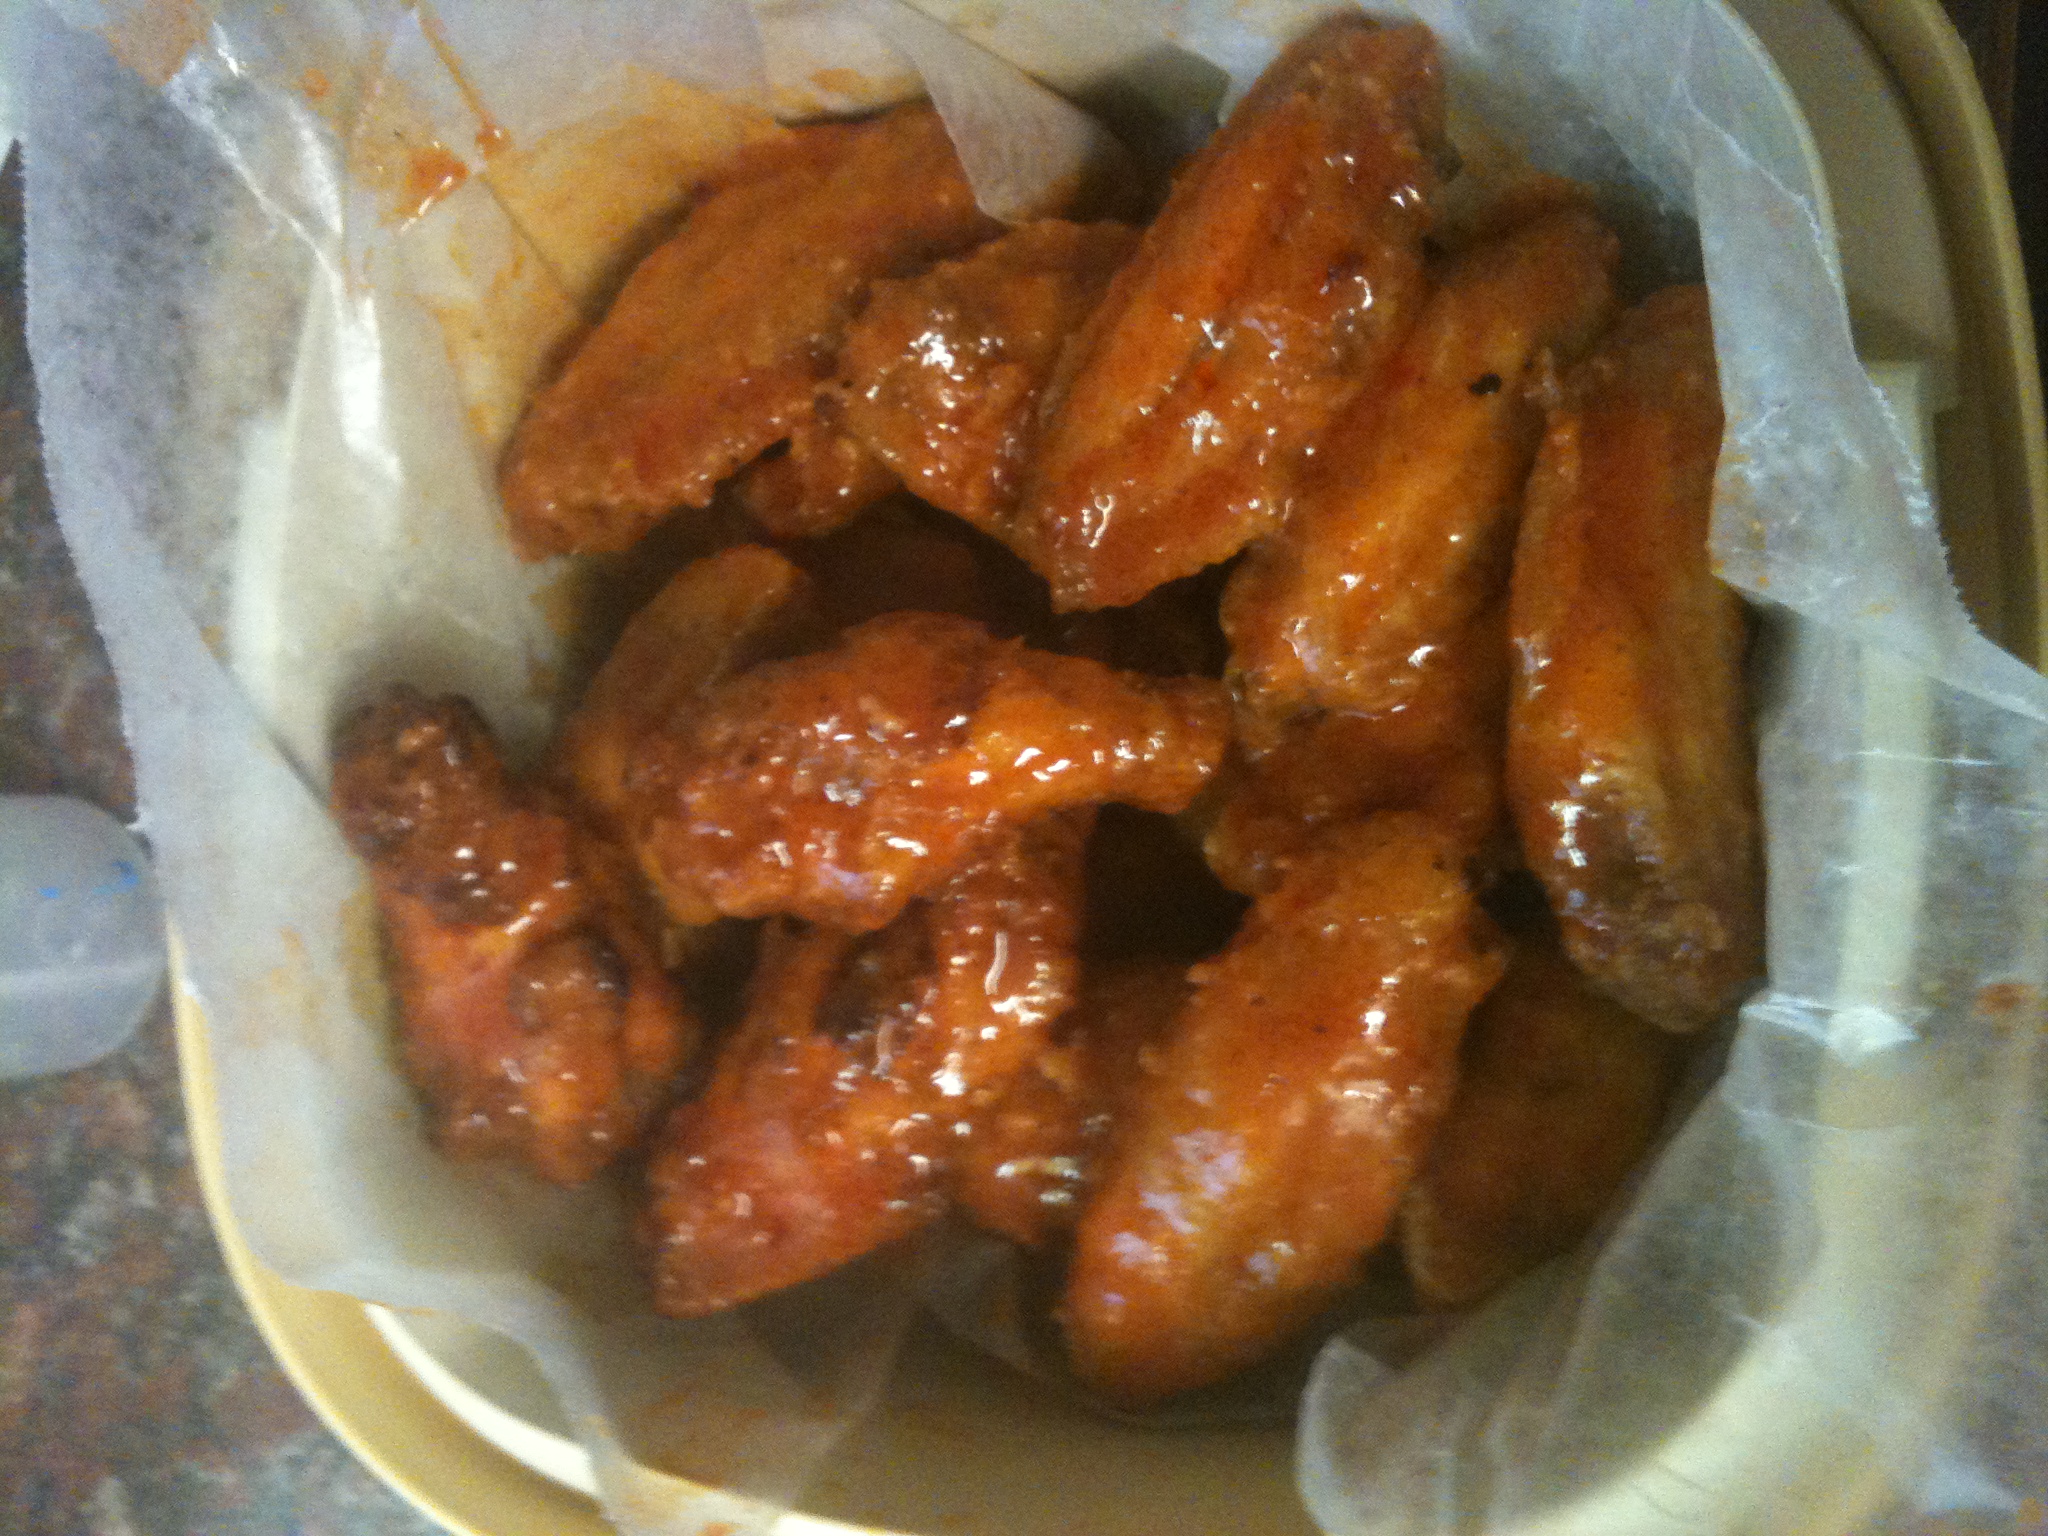 Friday May 4th. Hot wings, home made by bdoubled.